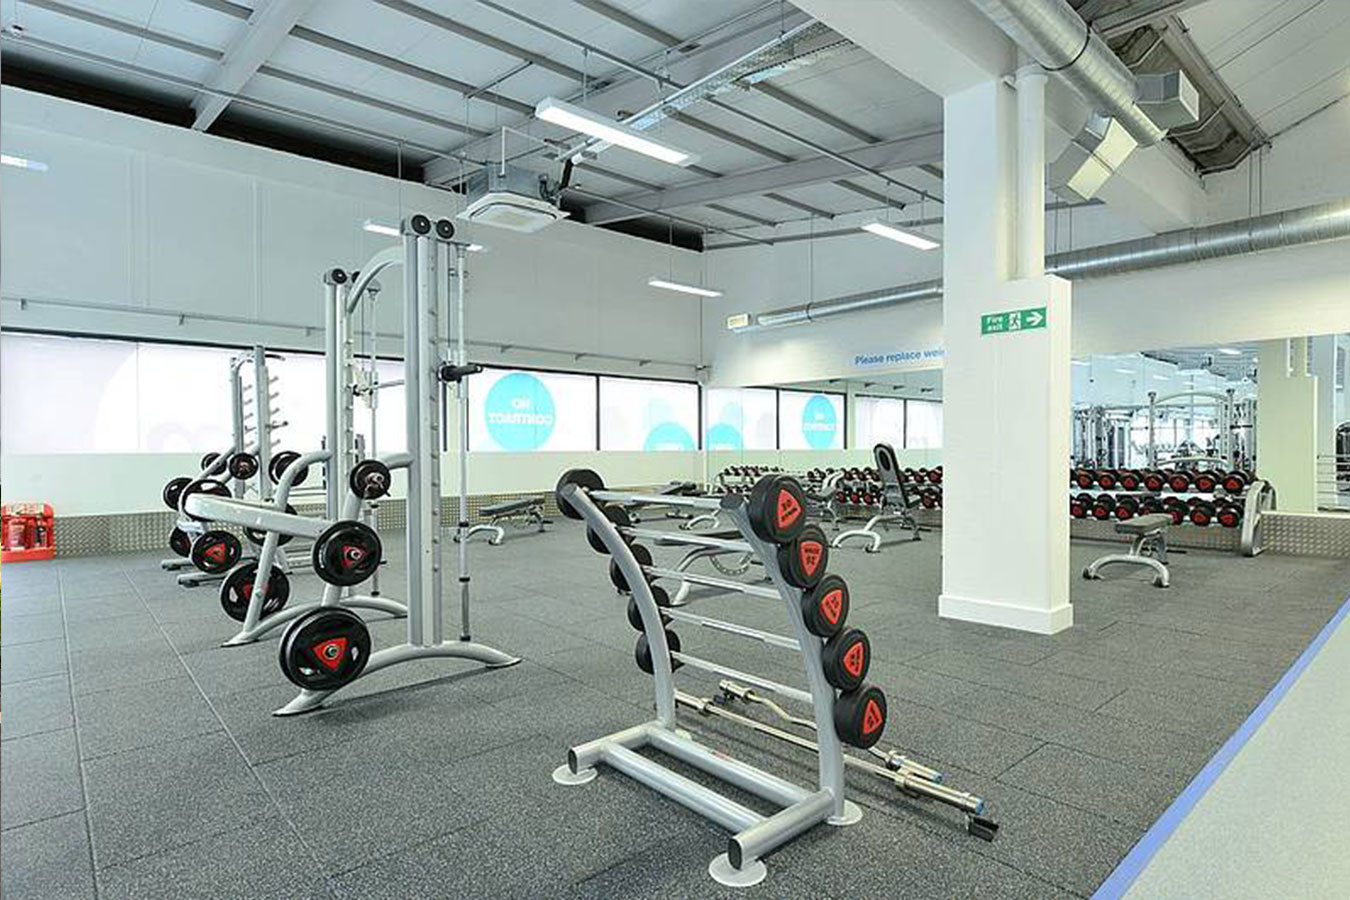 places-gym-leyland-interior-by-armex-systems-2